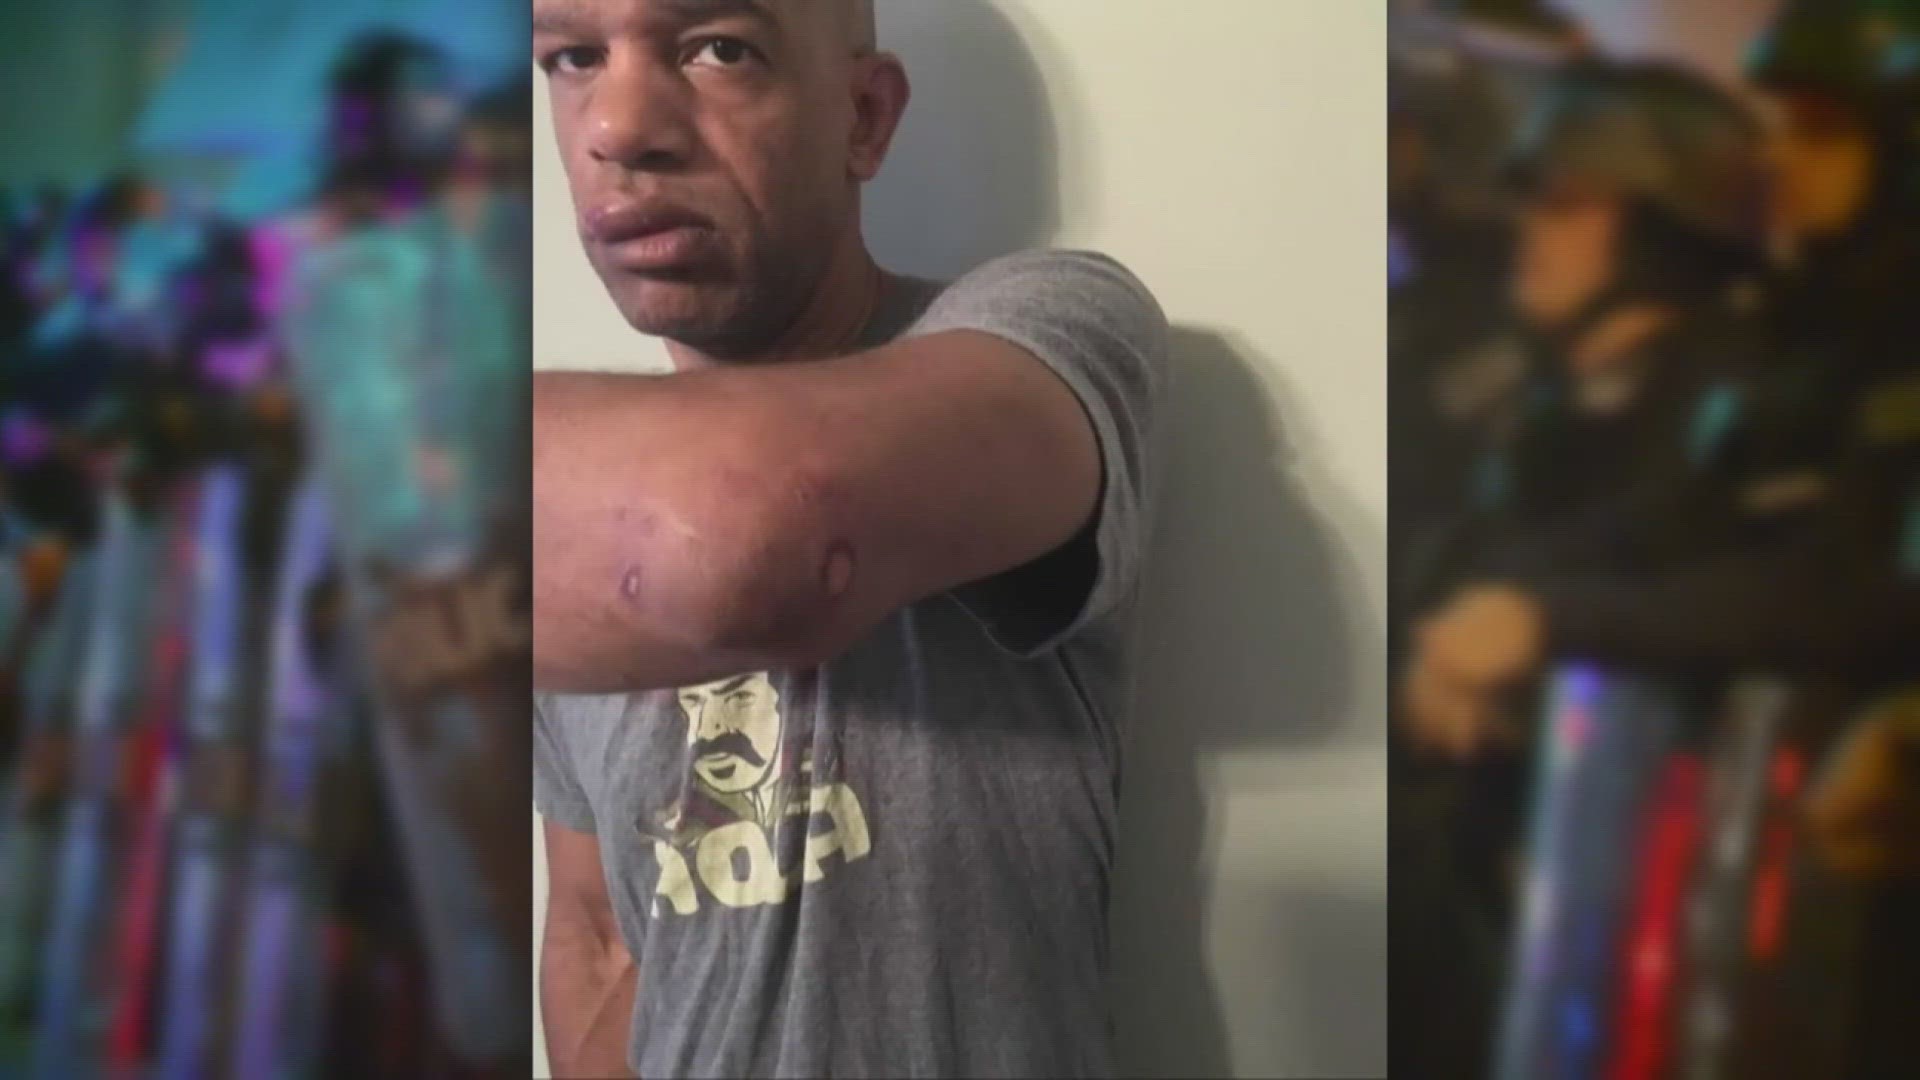 St. Louis police have reopened an internal investigation into the assault of former Detective Luther Hall. He was beaten by white officers while working undercover.